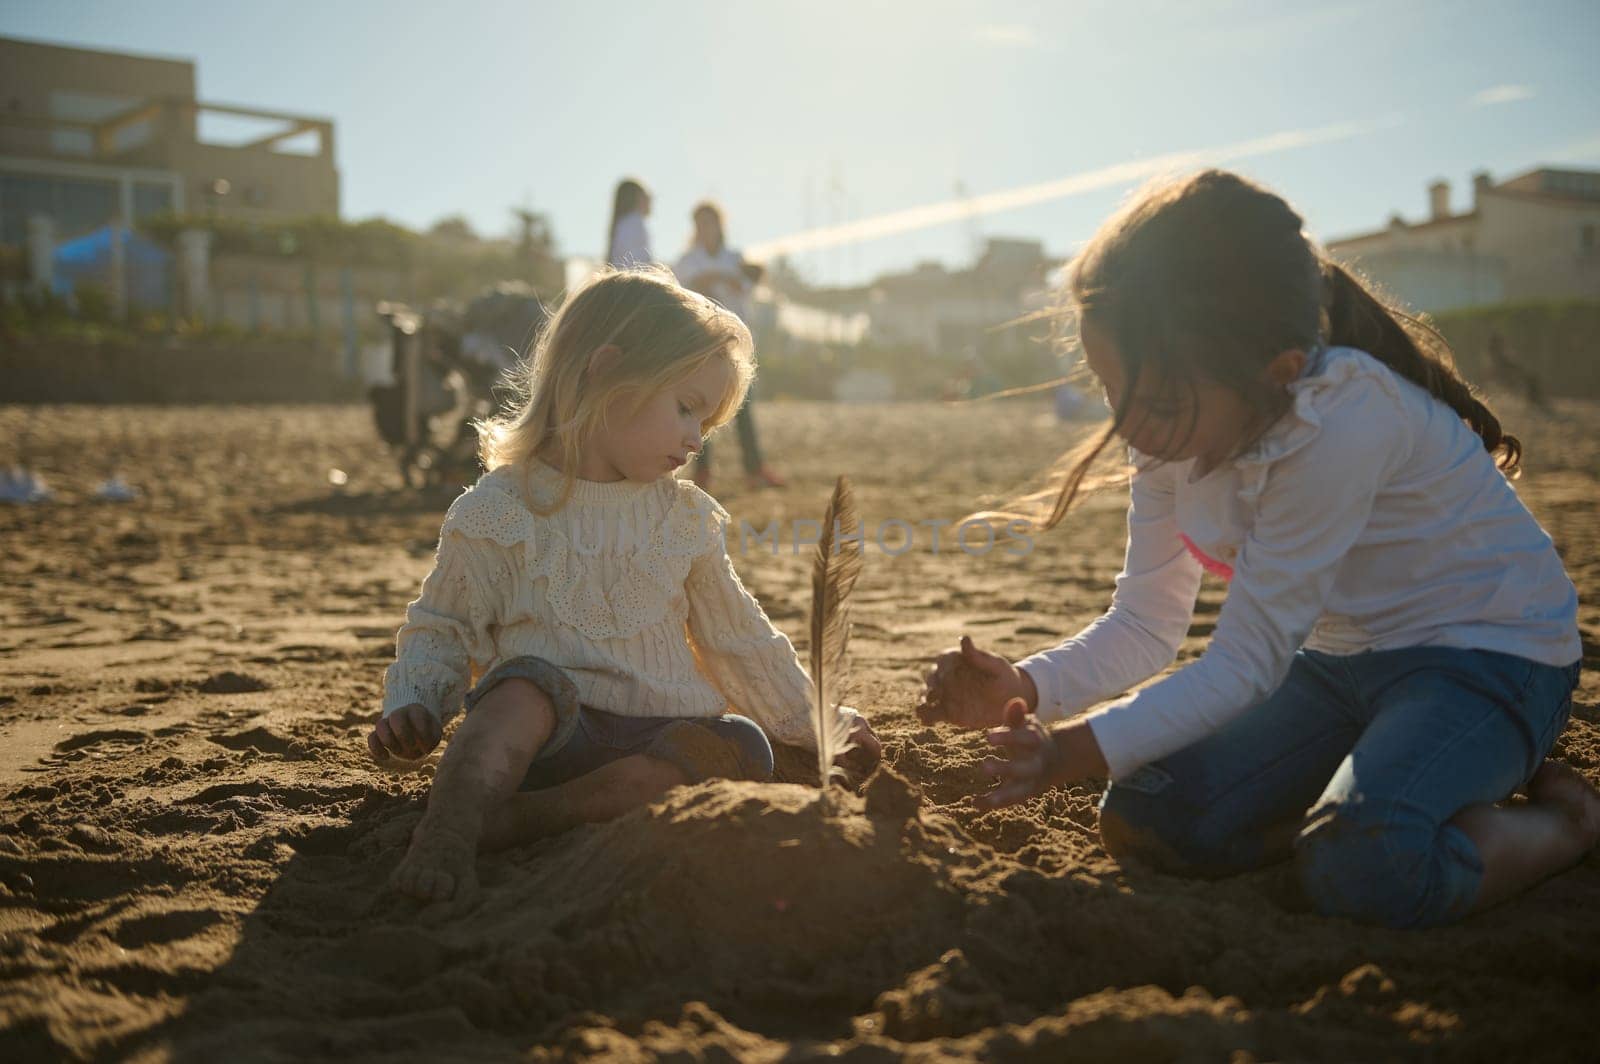 Happy kids girls building figures from sand while playing on the sandy beach at sunset by artgf